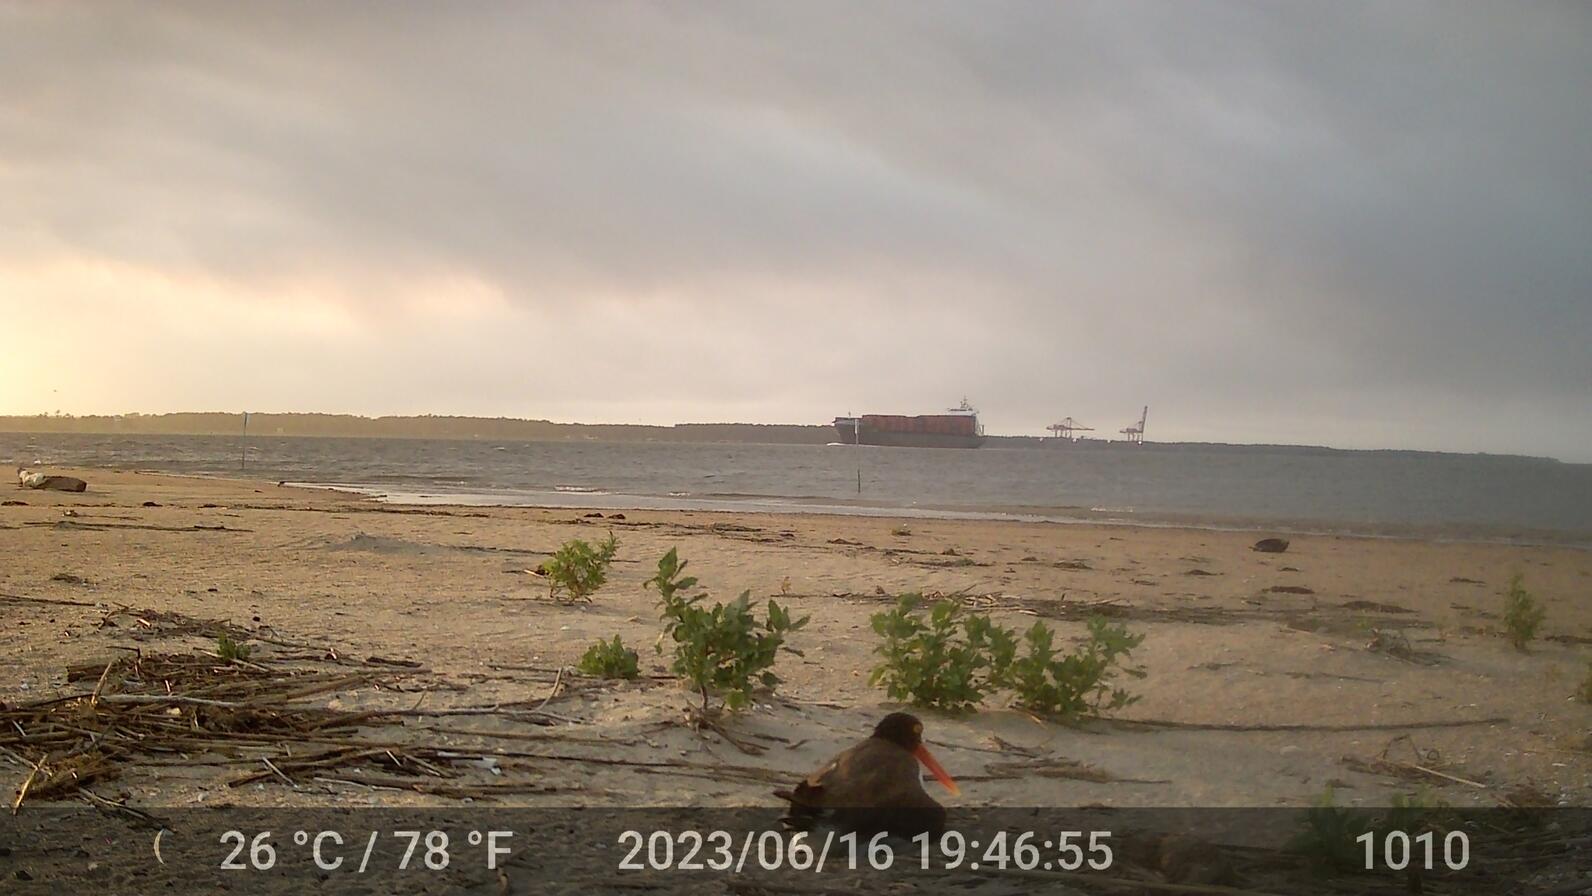 Shipping vessel navigating the Cape Fear River with the oystercatcher nest in the foreground.